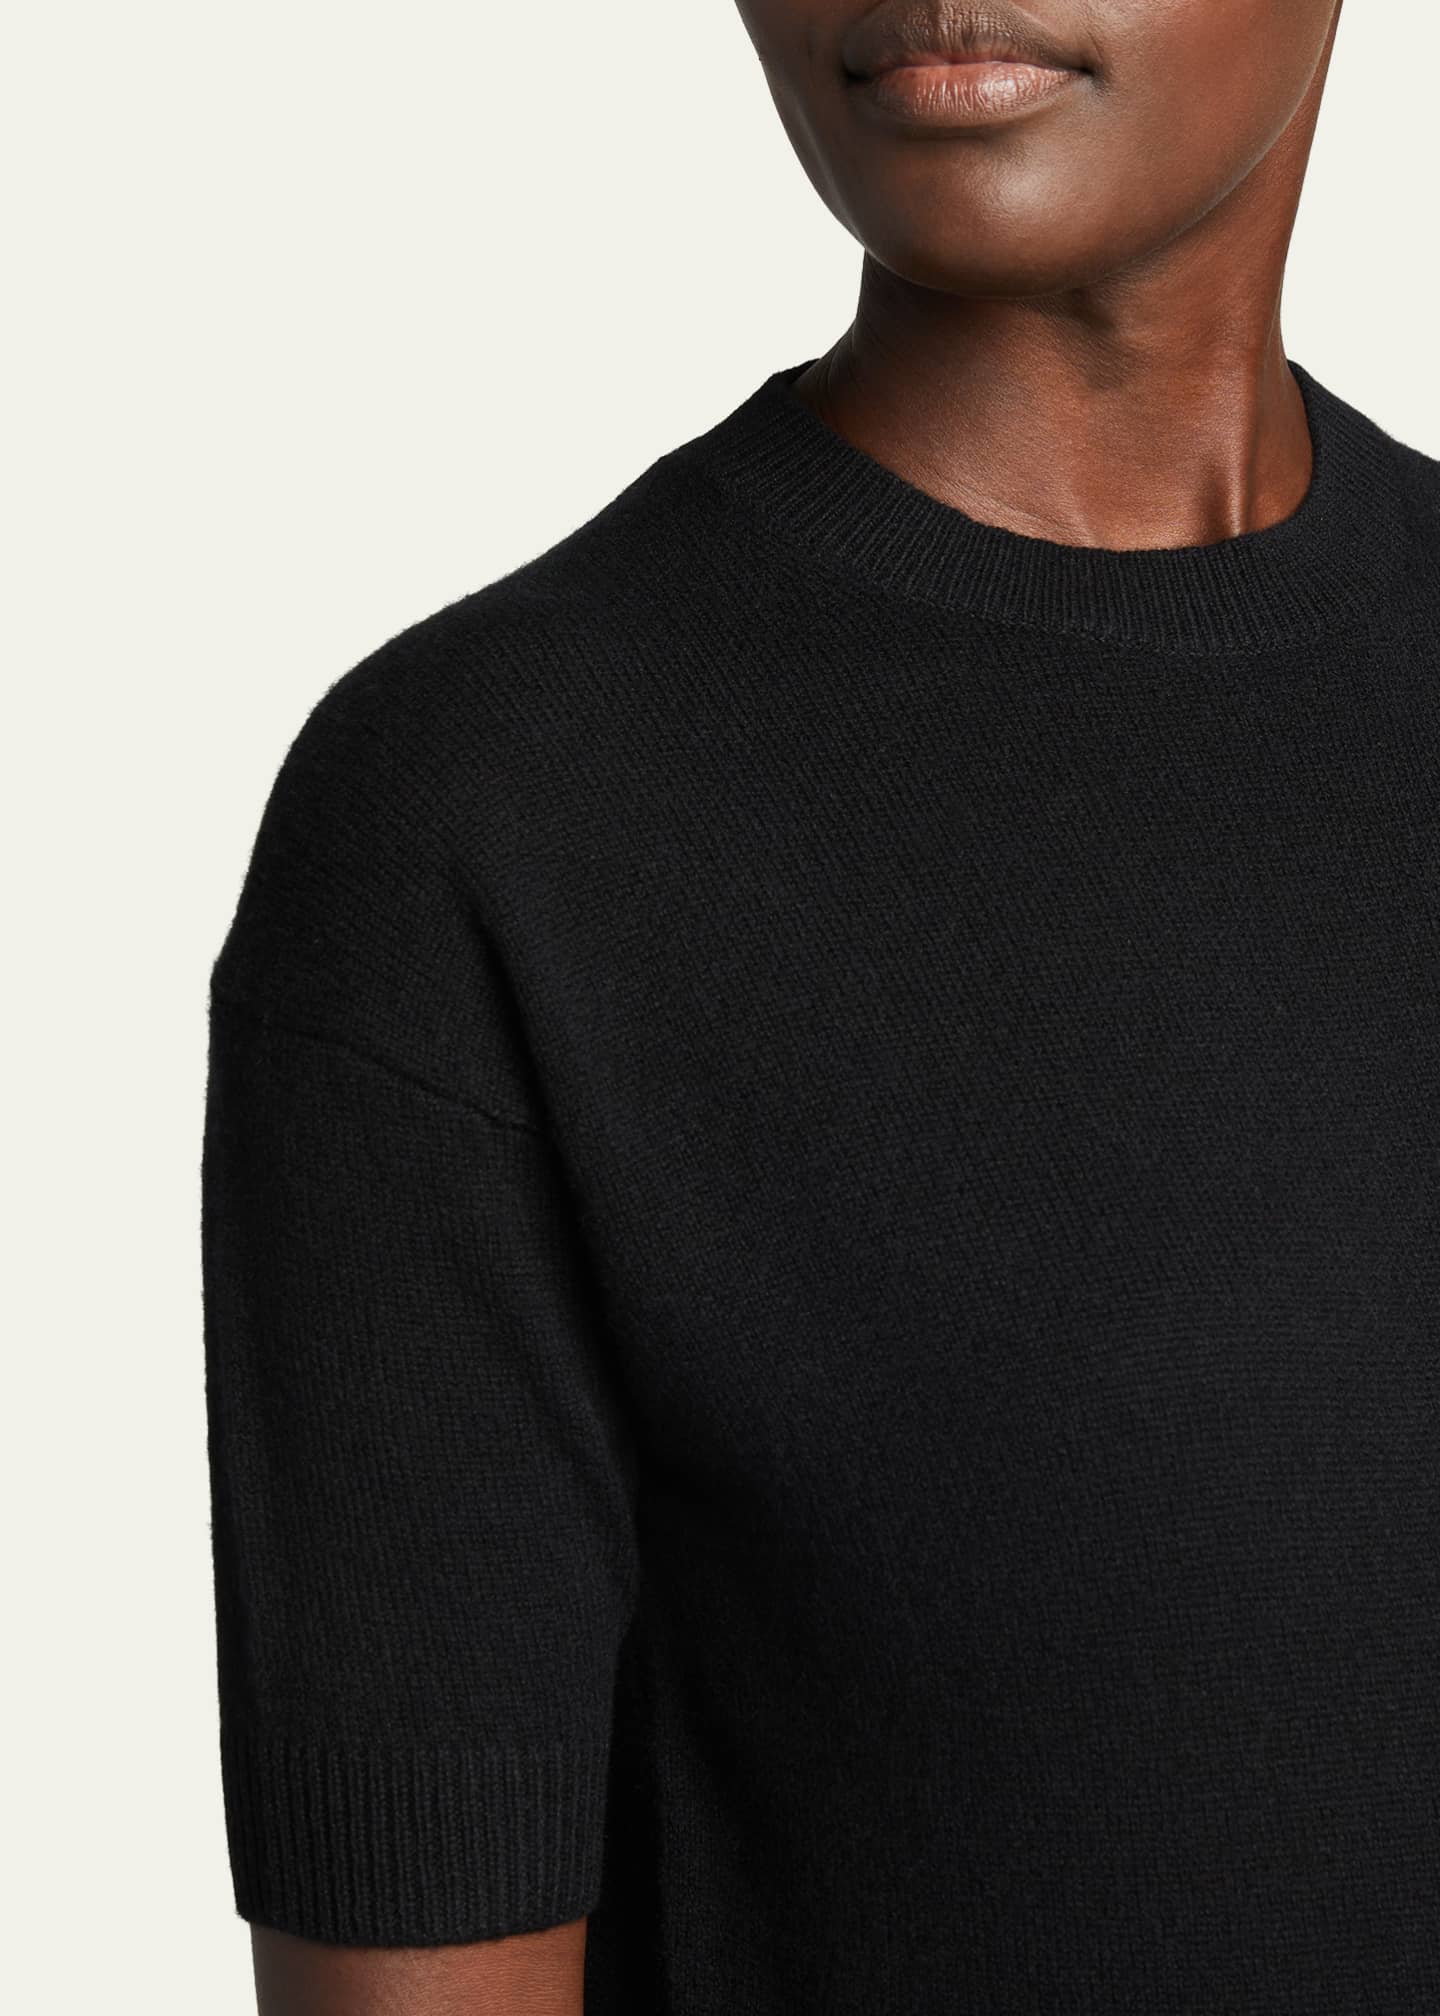 Theory Short-Sleeve Easy Cashmere Pullover - Bergdorf Goodman